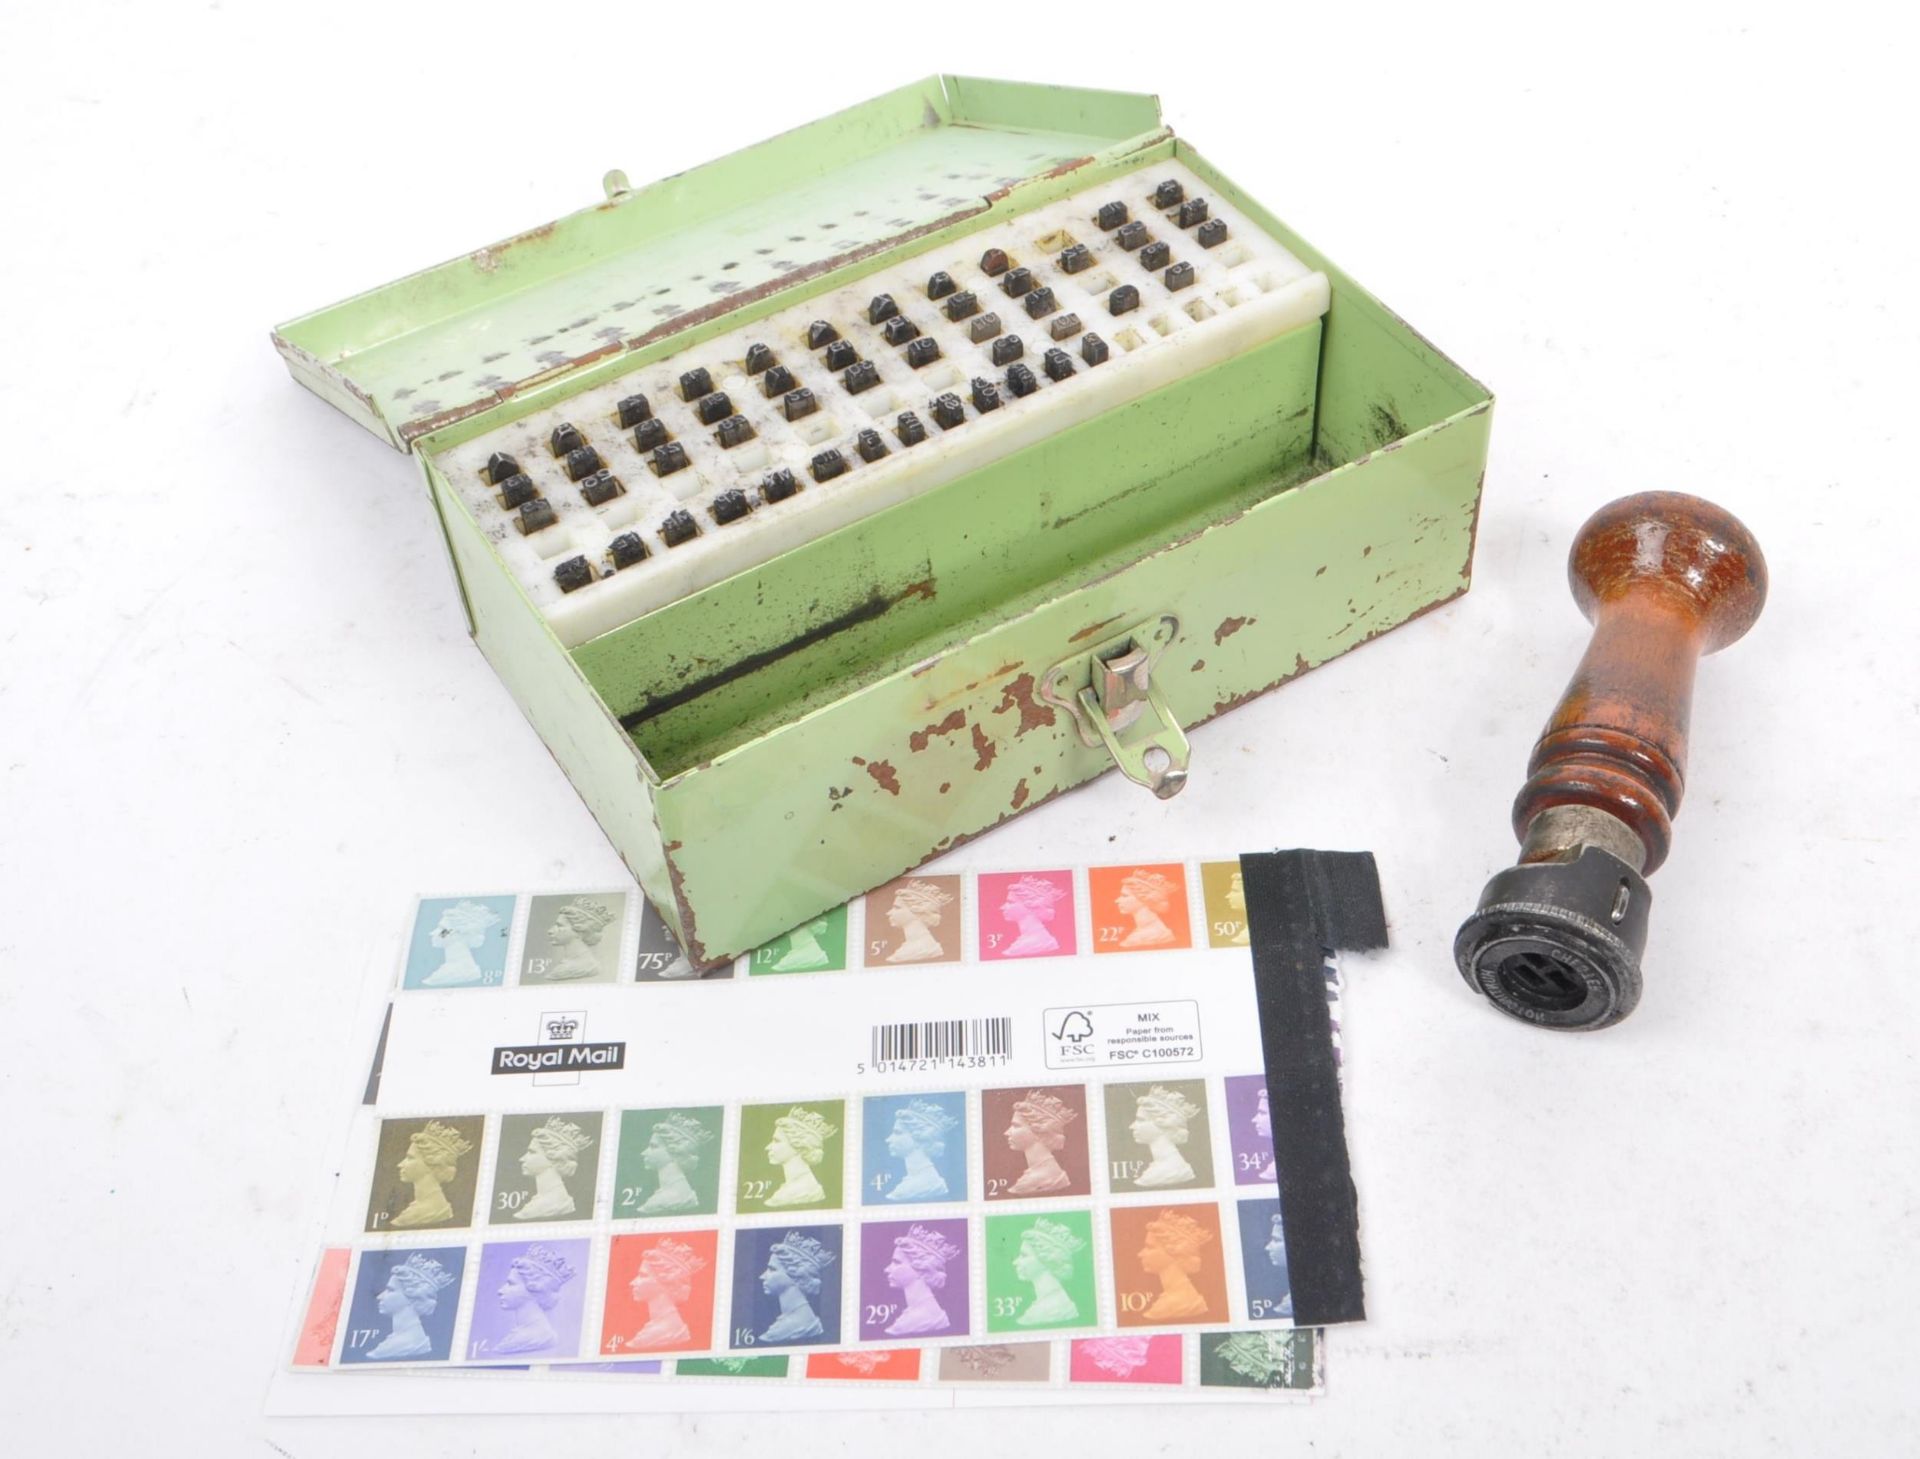 GENERAL POST OFFICE - VINTAGE SATE STAMPER WITH TIN BOX